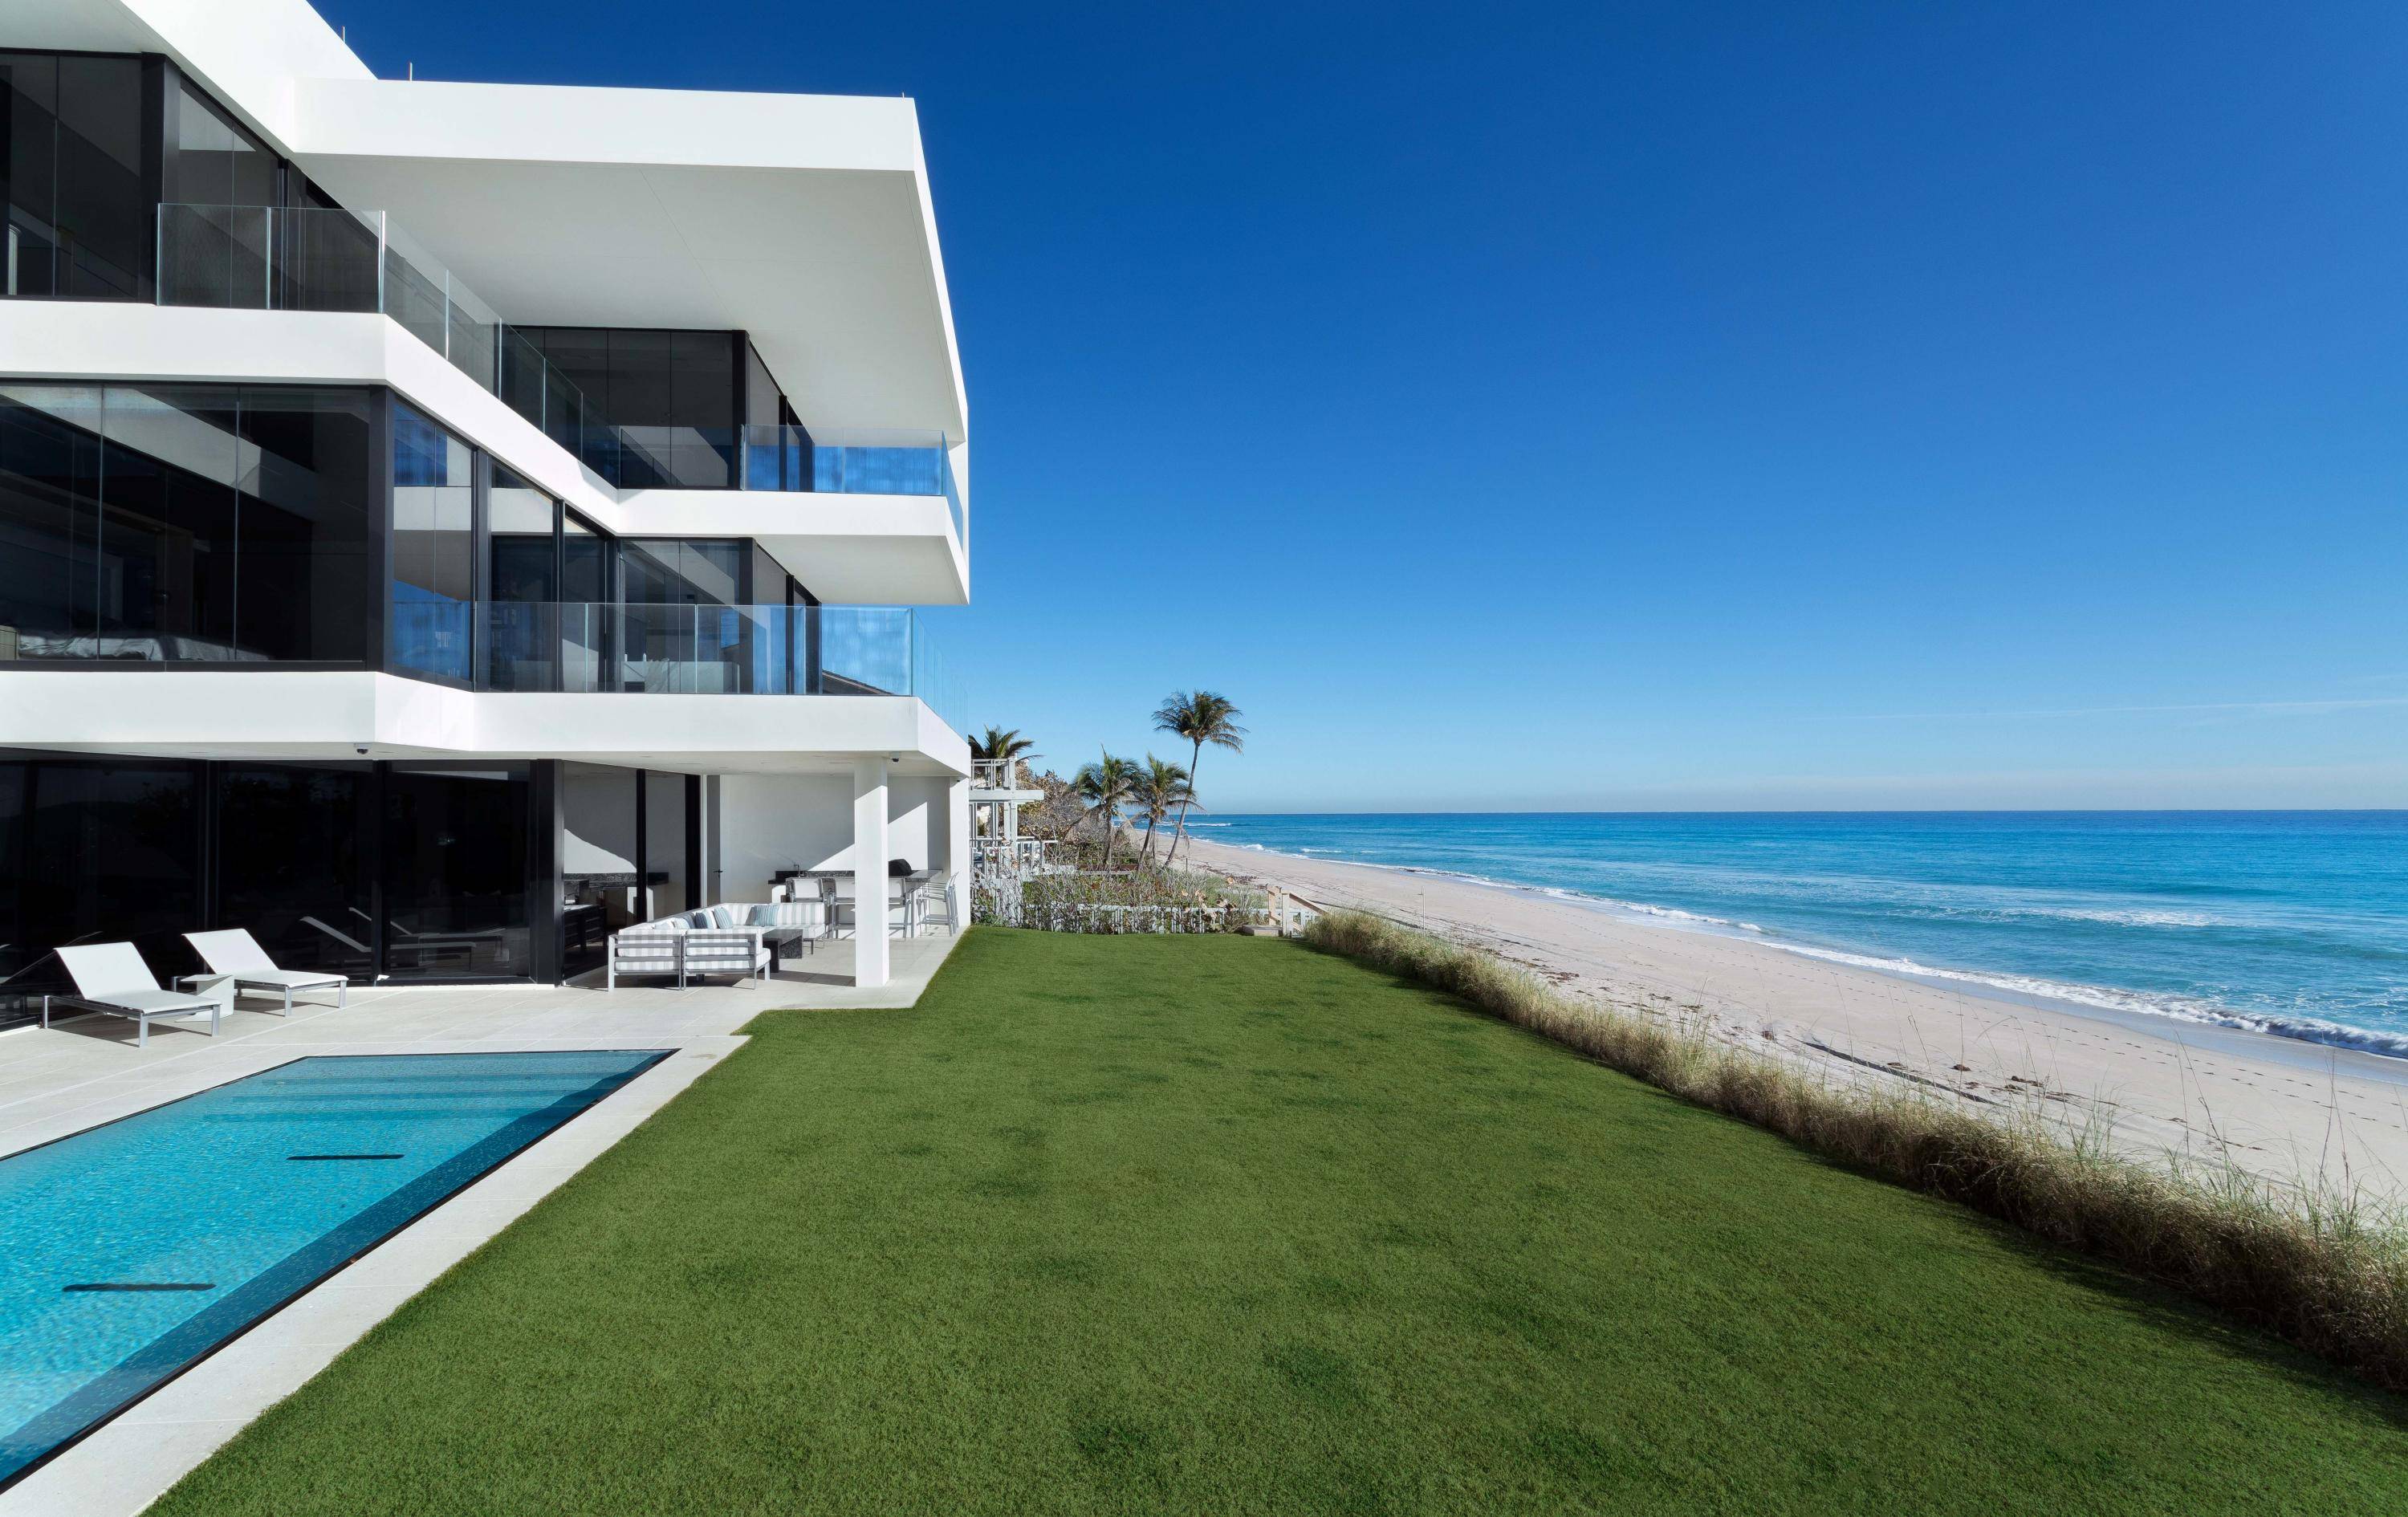 THE BEACH HOUSE A Gated Modern Malibu inspired Ocean To Intracoastal Estate sited on 2.